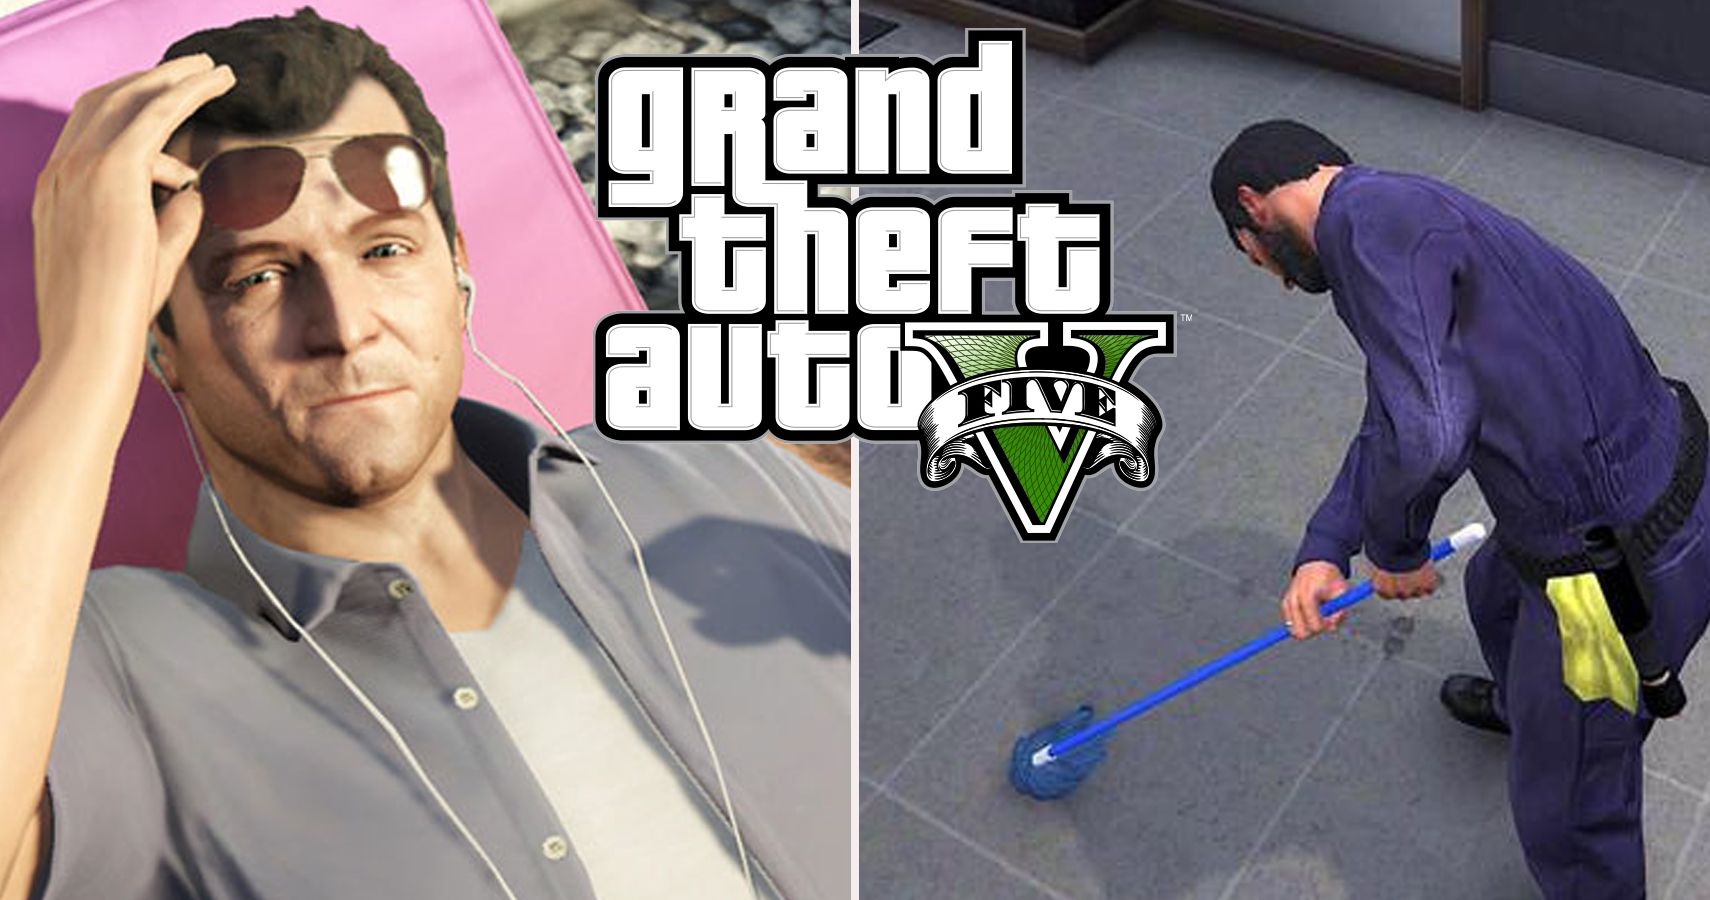 15 WORST Missions In Grand Theft Auto V That Shame The Series